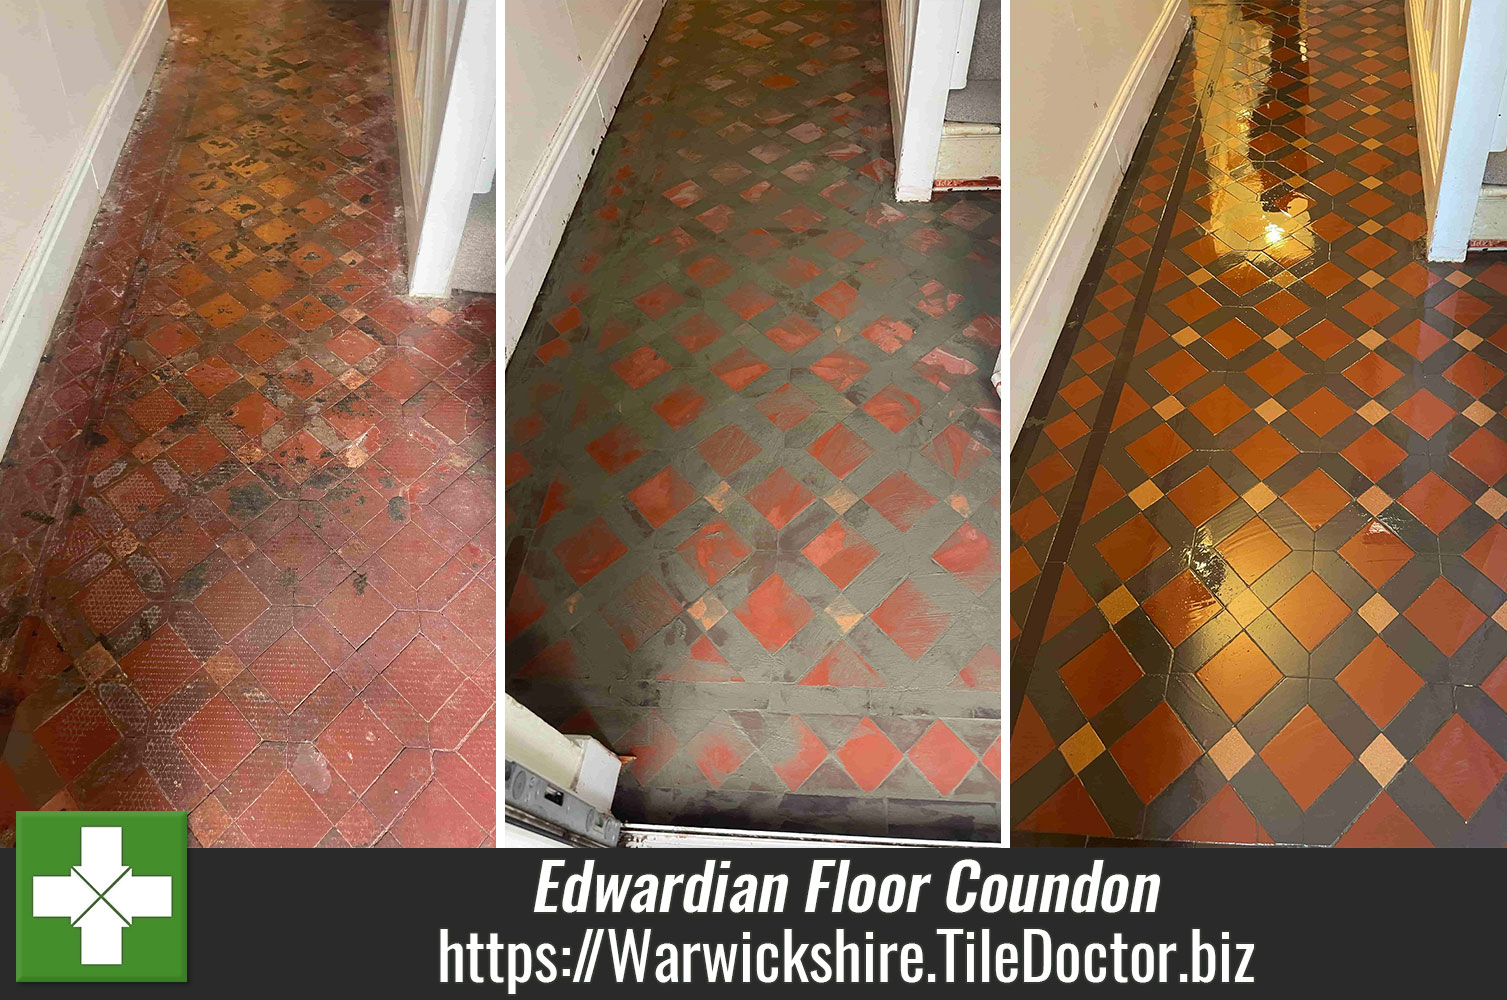 Tile Doctor Acid Gel used to Treat Efflorescence in an Edwardian Property Coundon